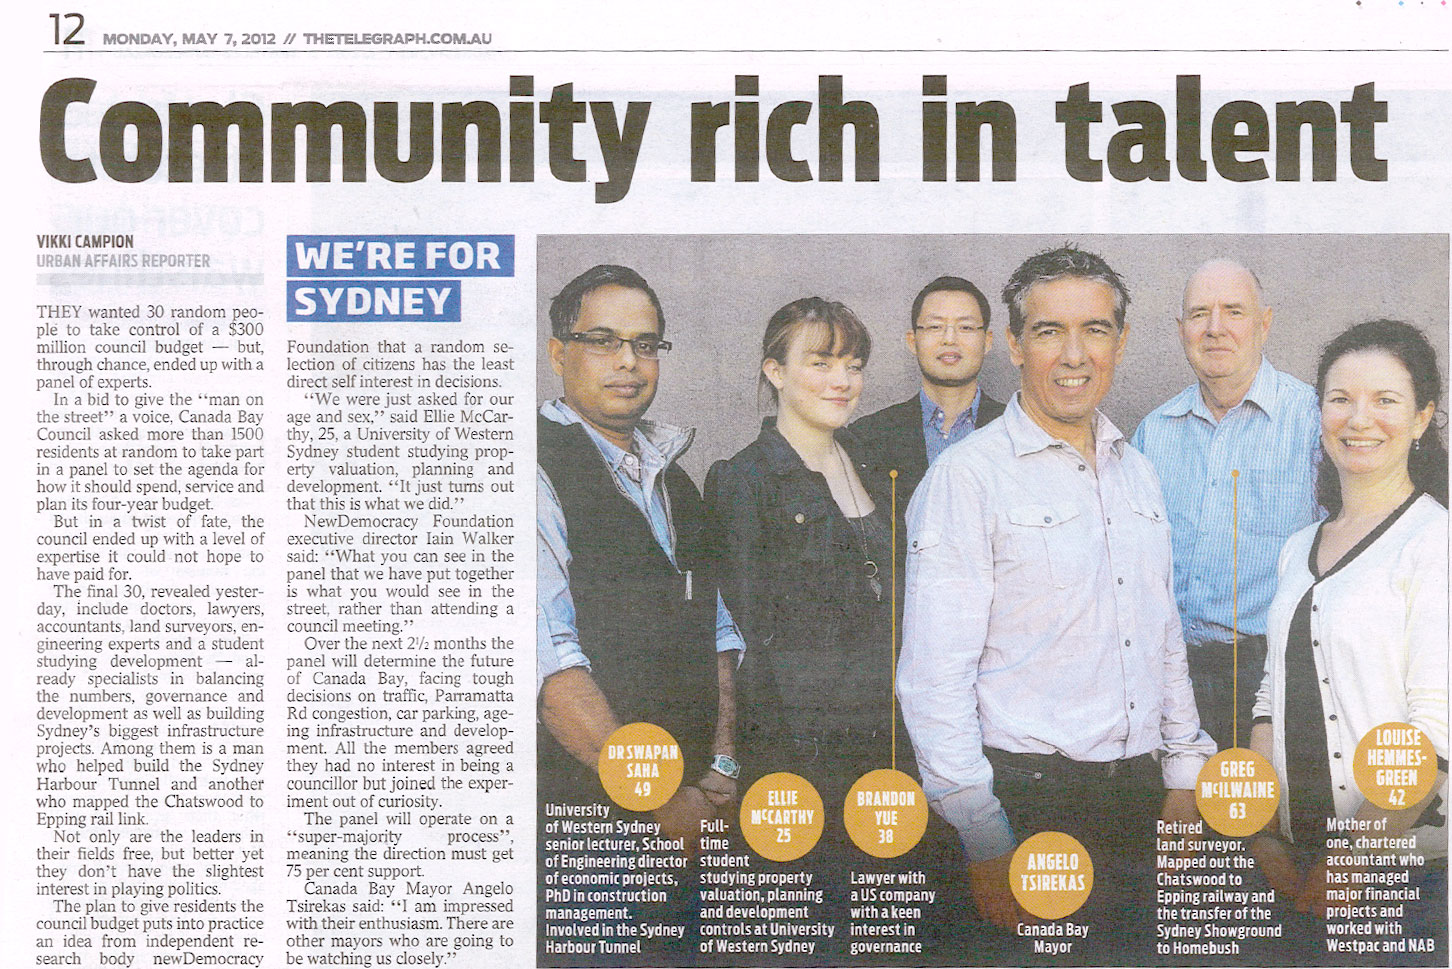 Daily Telegraph. Community Rich in Talent